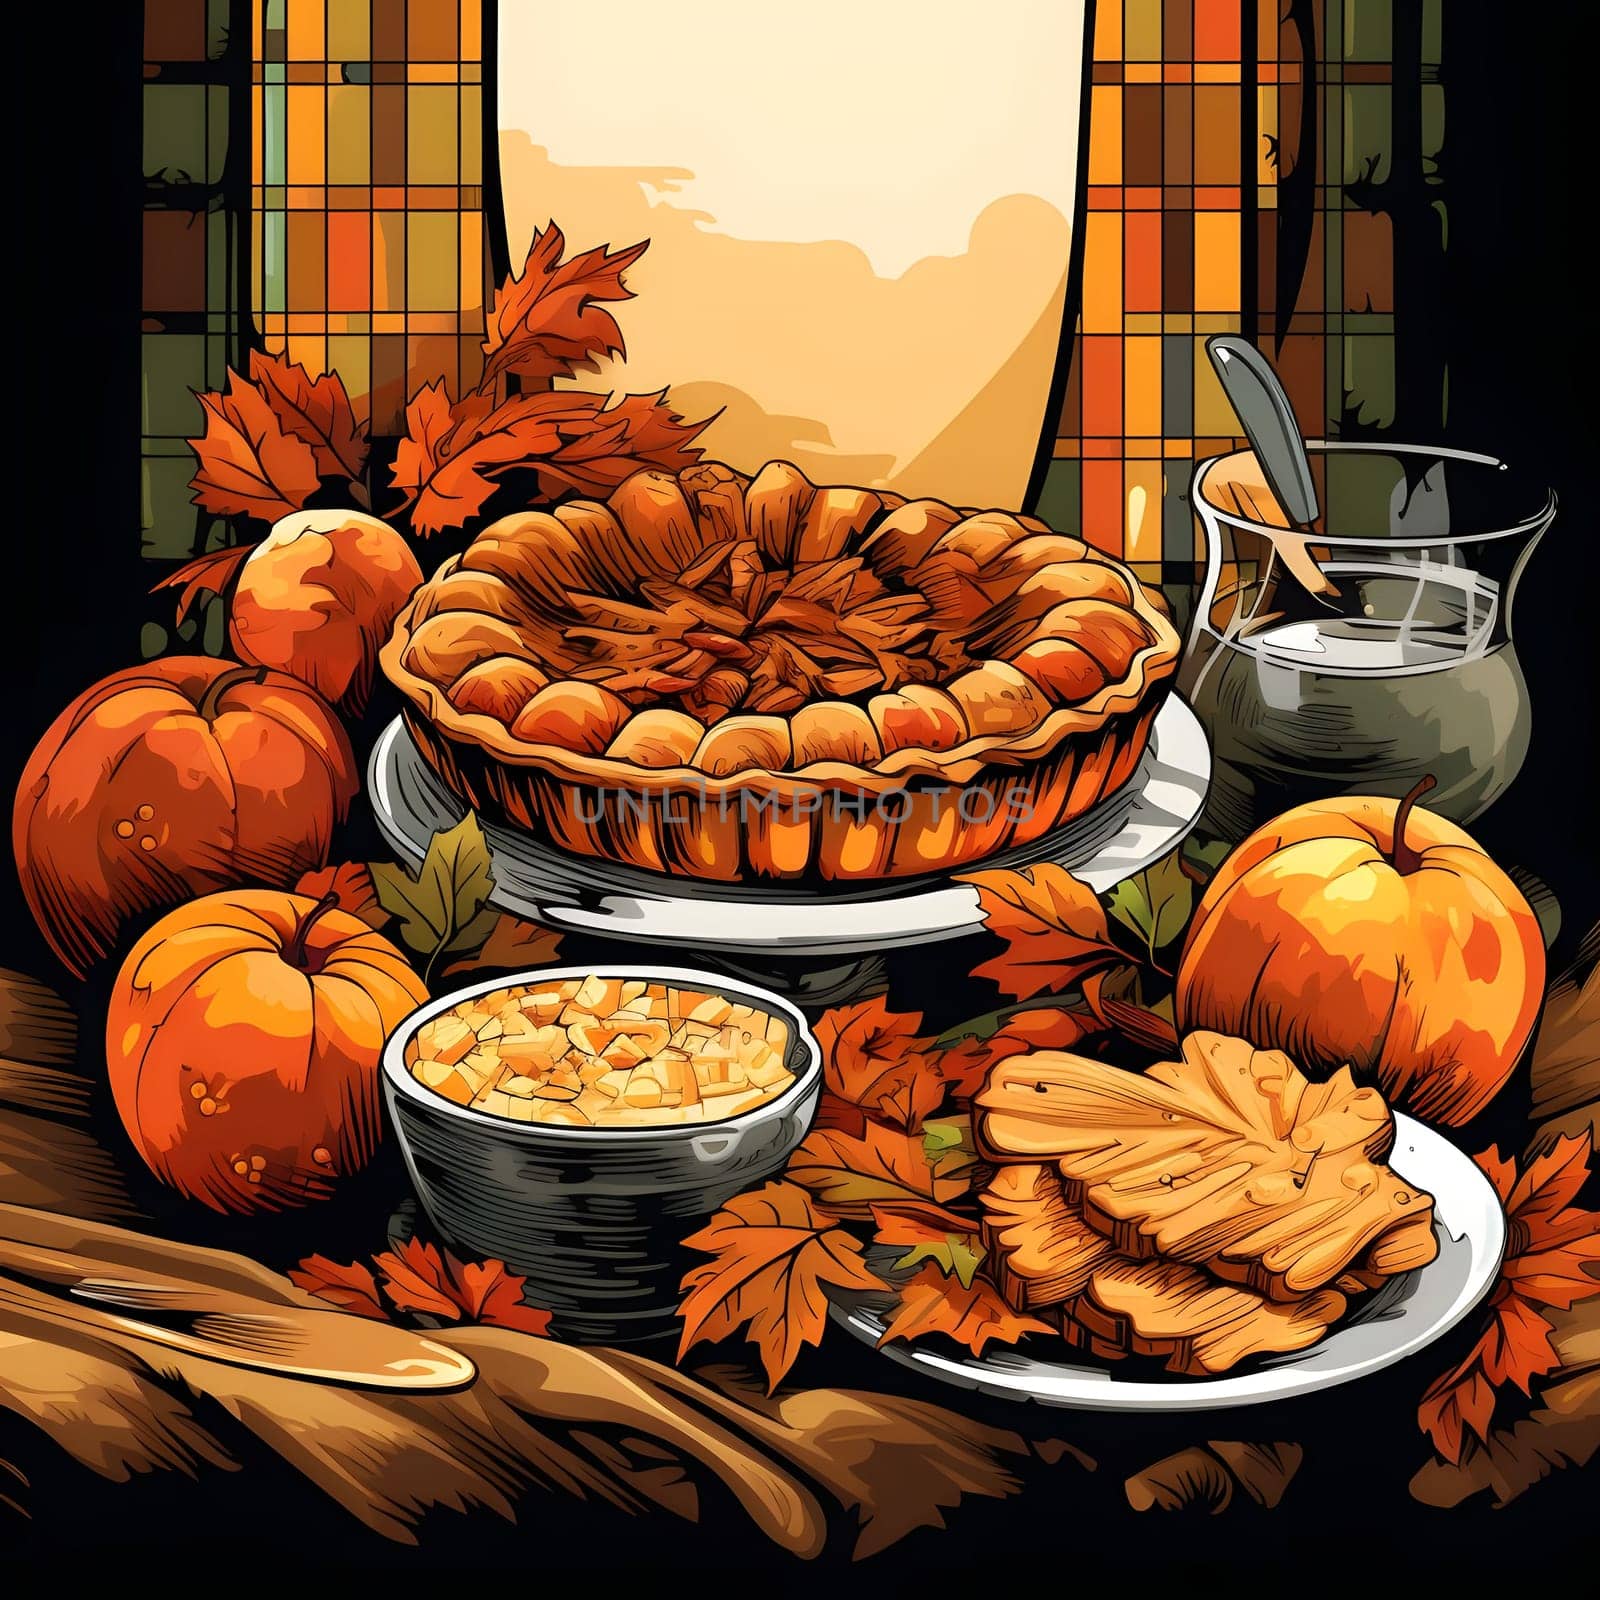 Illustration of pumpkin pie, pumpkins and leaves. Pumpkin as a dish of thanksgiving for the harvest. An atmosphere of joy and celebration.